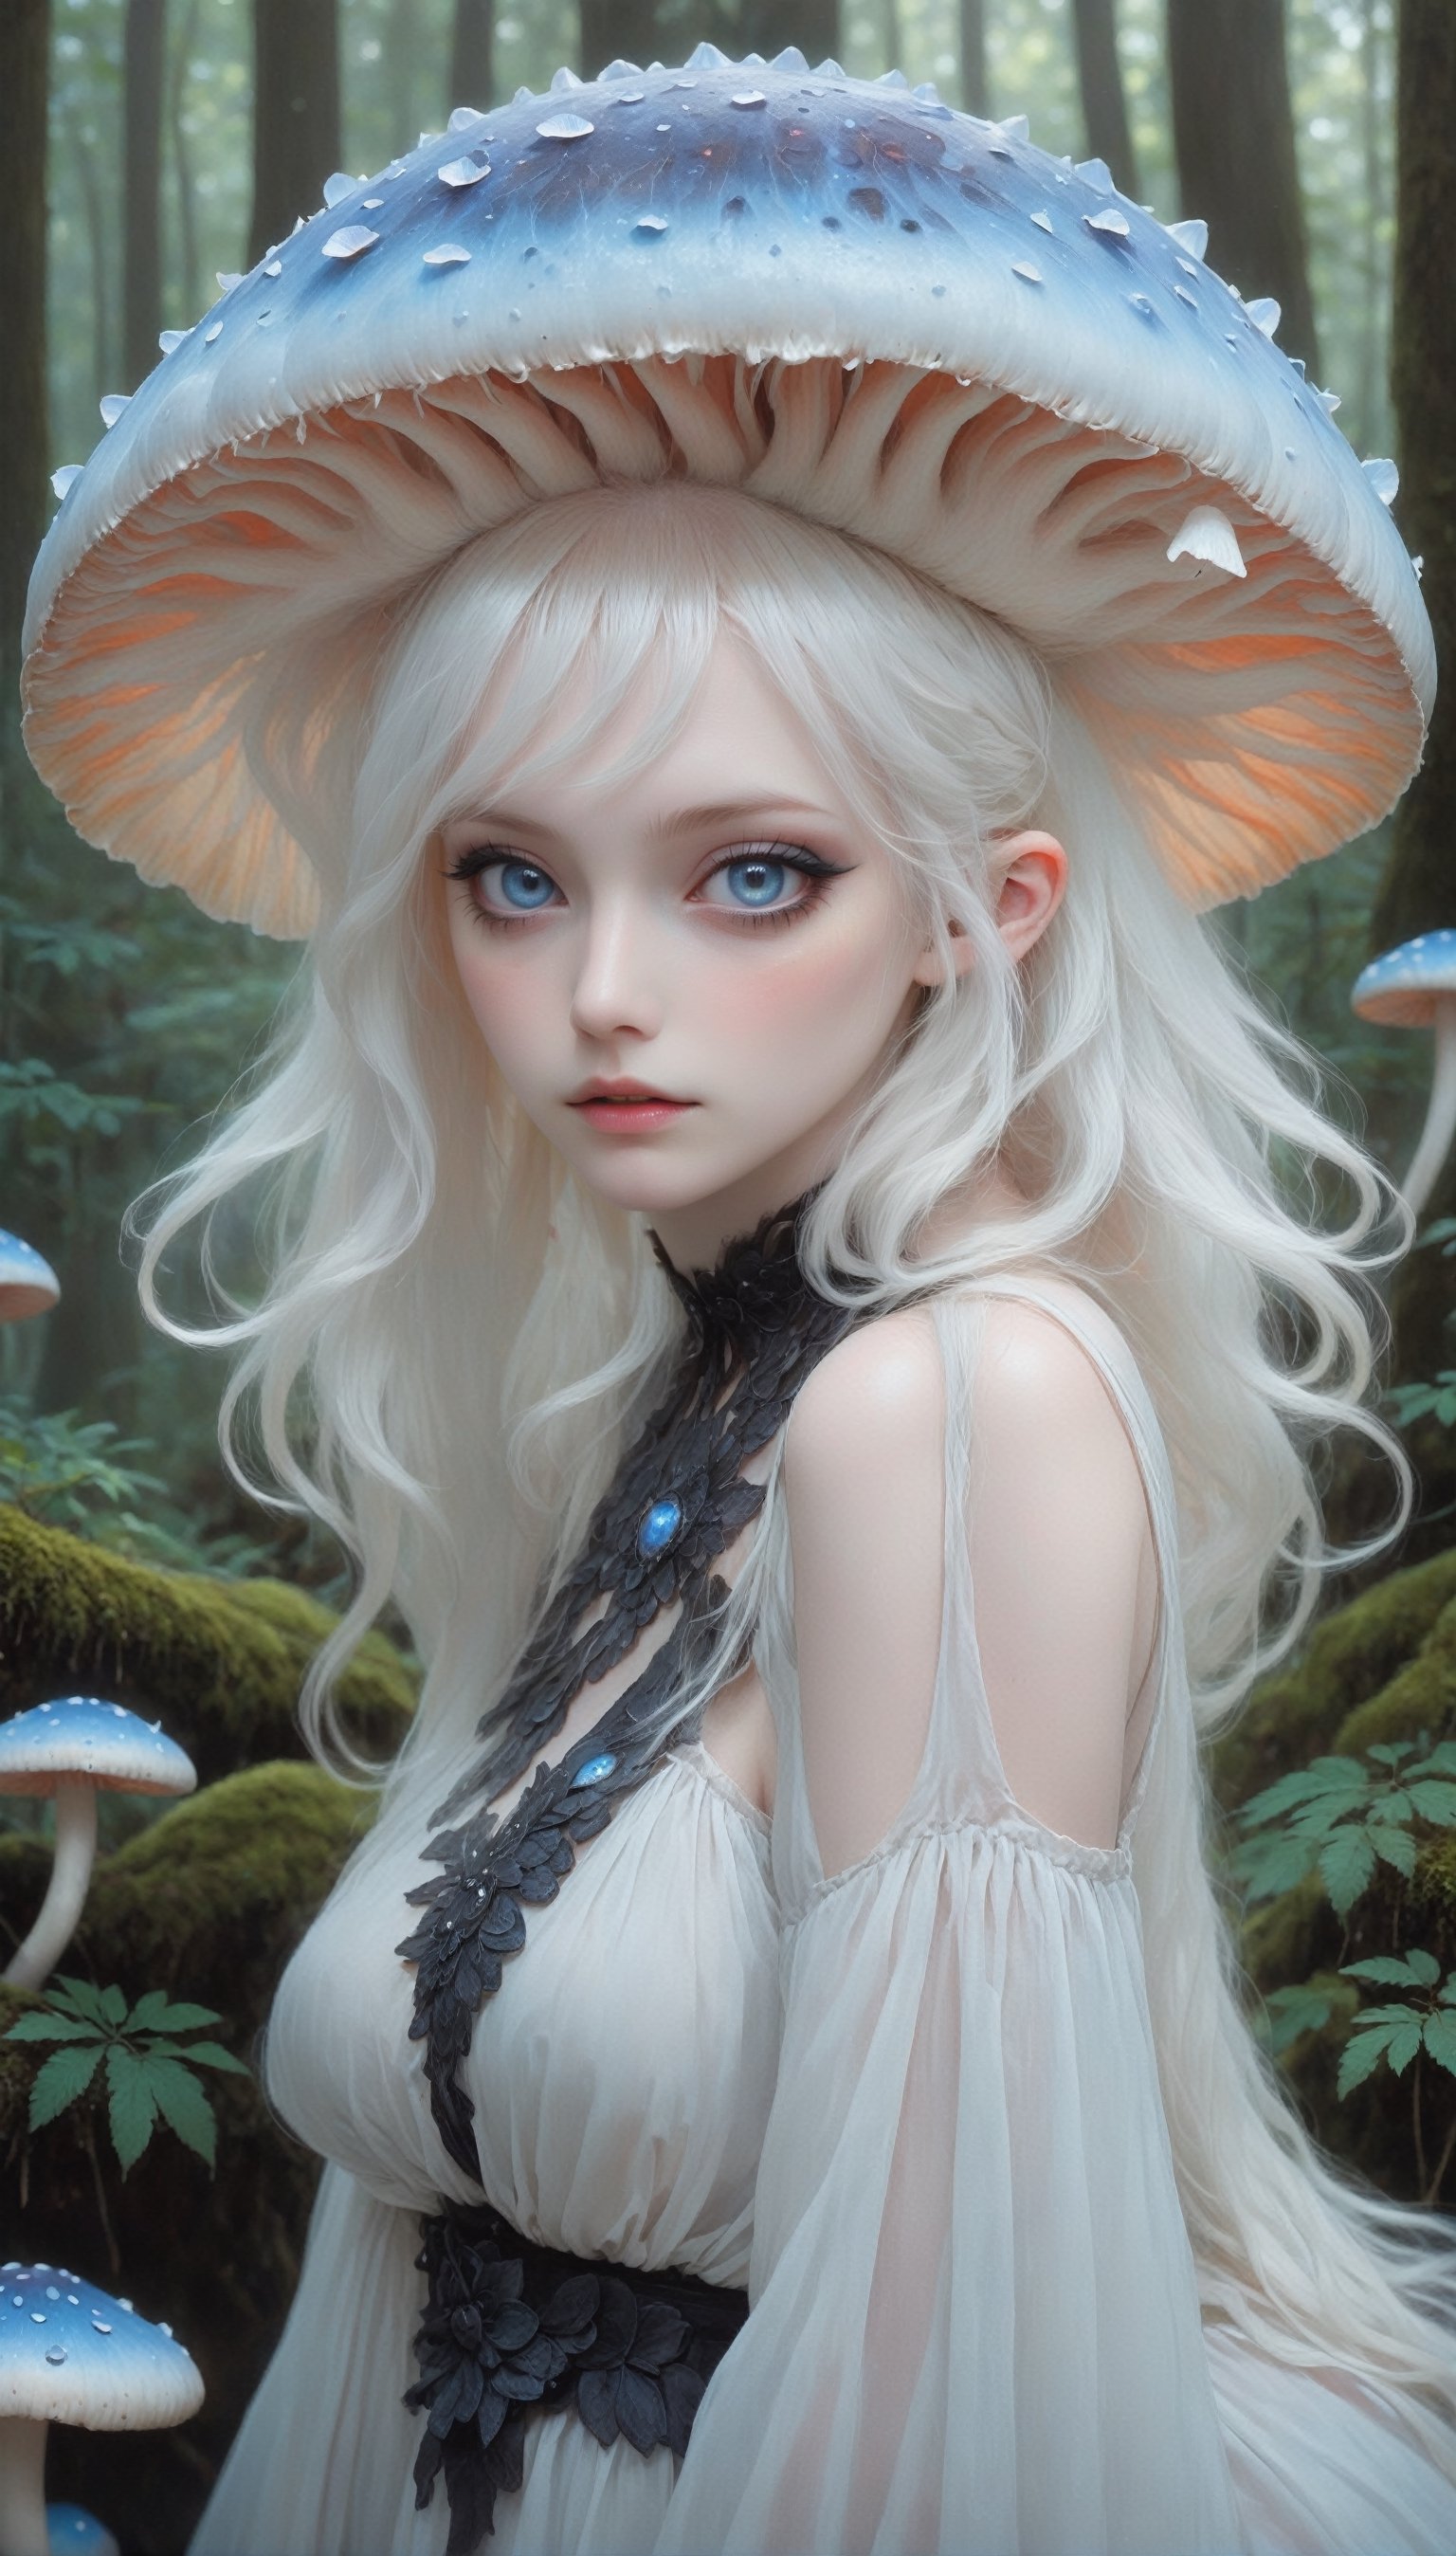 serene forest scene where a delicate albino mushroom girl,
mushroom Head,
Beautiful blue eyes, soft expression, (heavy black eyeshadow:1.2), Depth and Dimension in the Pupils,
stands amidst the tranquility, Adorned with soft, pale-colored petals resembling mushroom caps and delicate mycelium cascading from her hair, she exudes ethereal beauty. Her eyes, silver or pale blue, convey mystery and wonder as she moves gracefully through the enchanted landscape. Surrounded by vibrant colors and playful woodland creatures, she embodies the magic and wonder of nature's hidden treasures.",Christmas Fantasy World,enakorin,mushroomz,p3rfect boobs